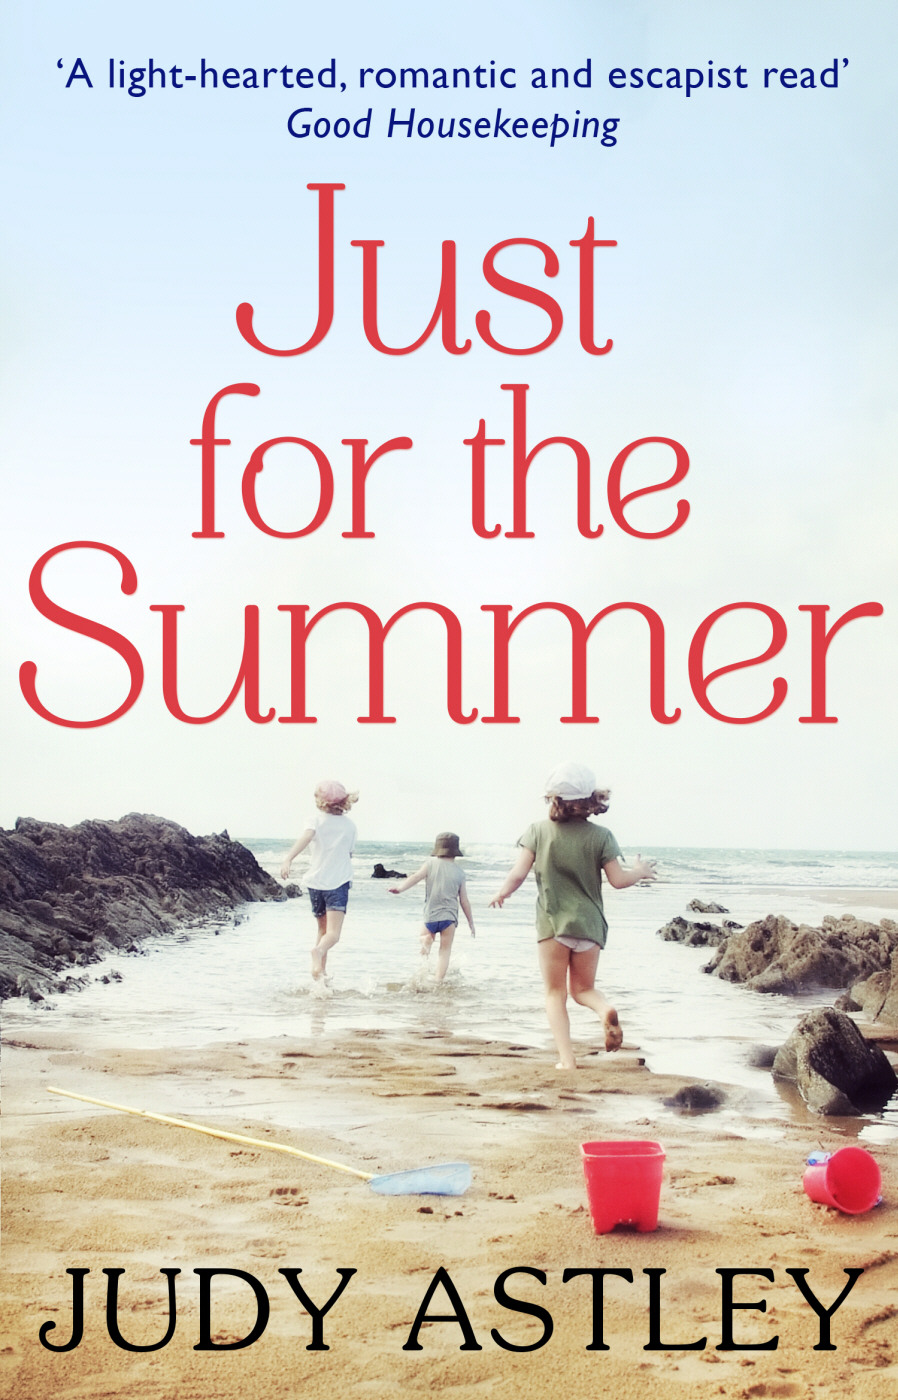 Just For the Summer (1994) by Judy Astley